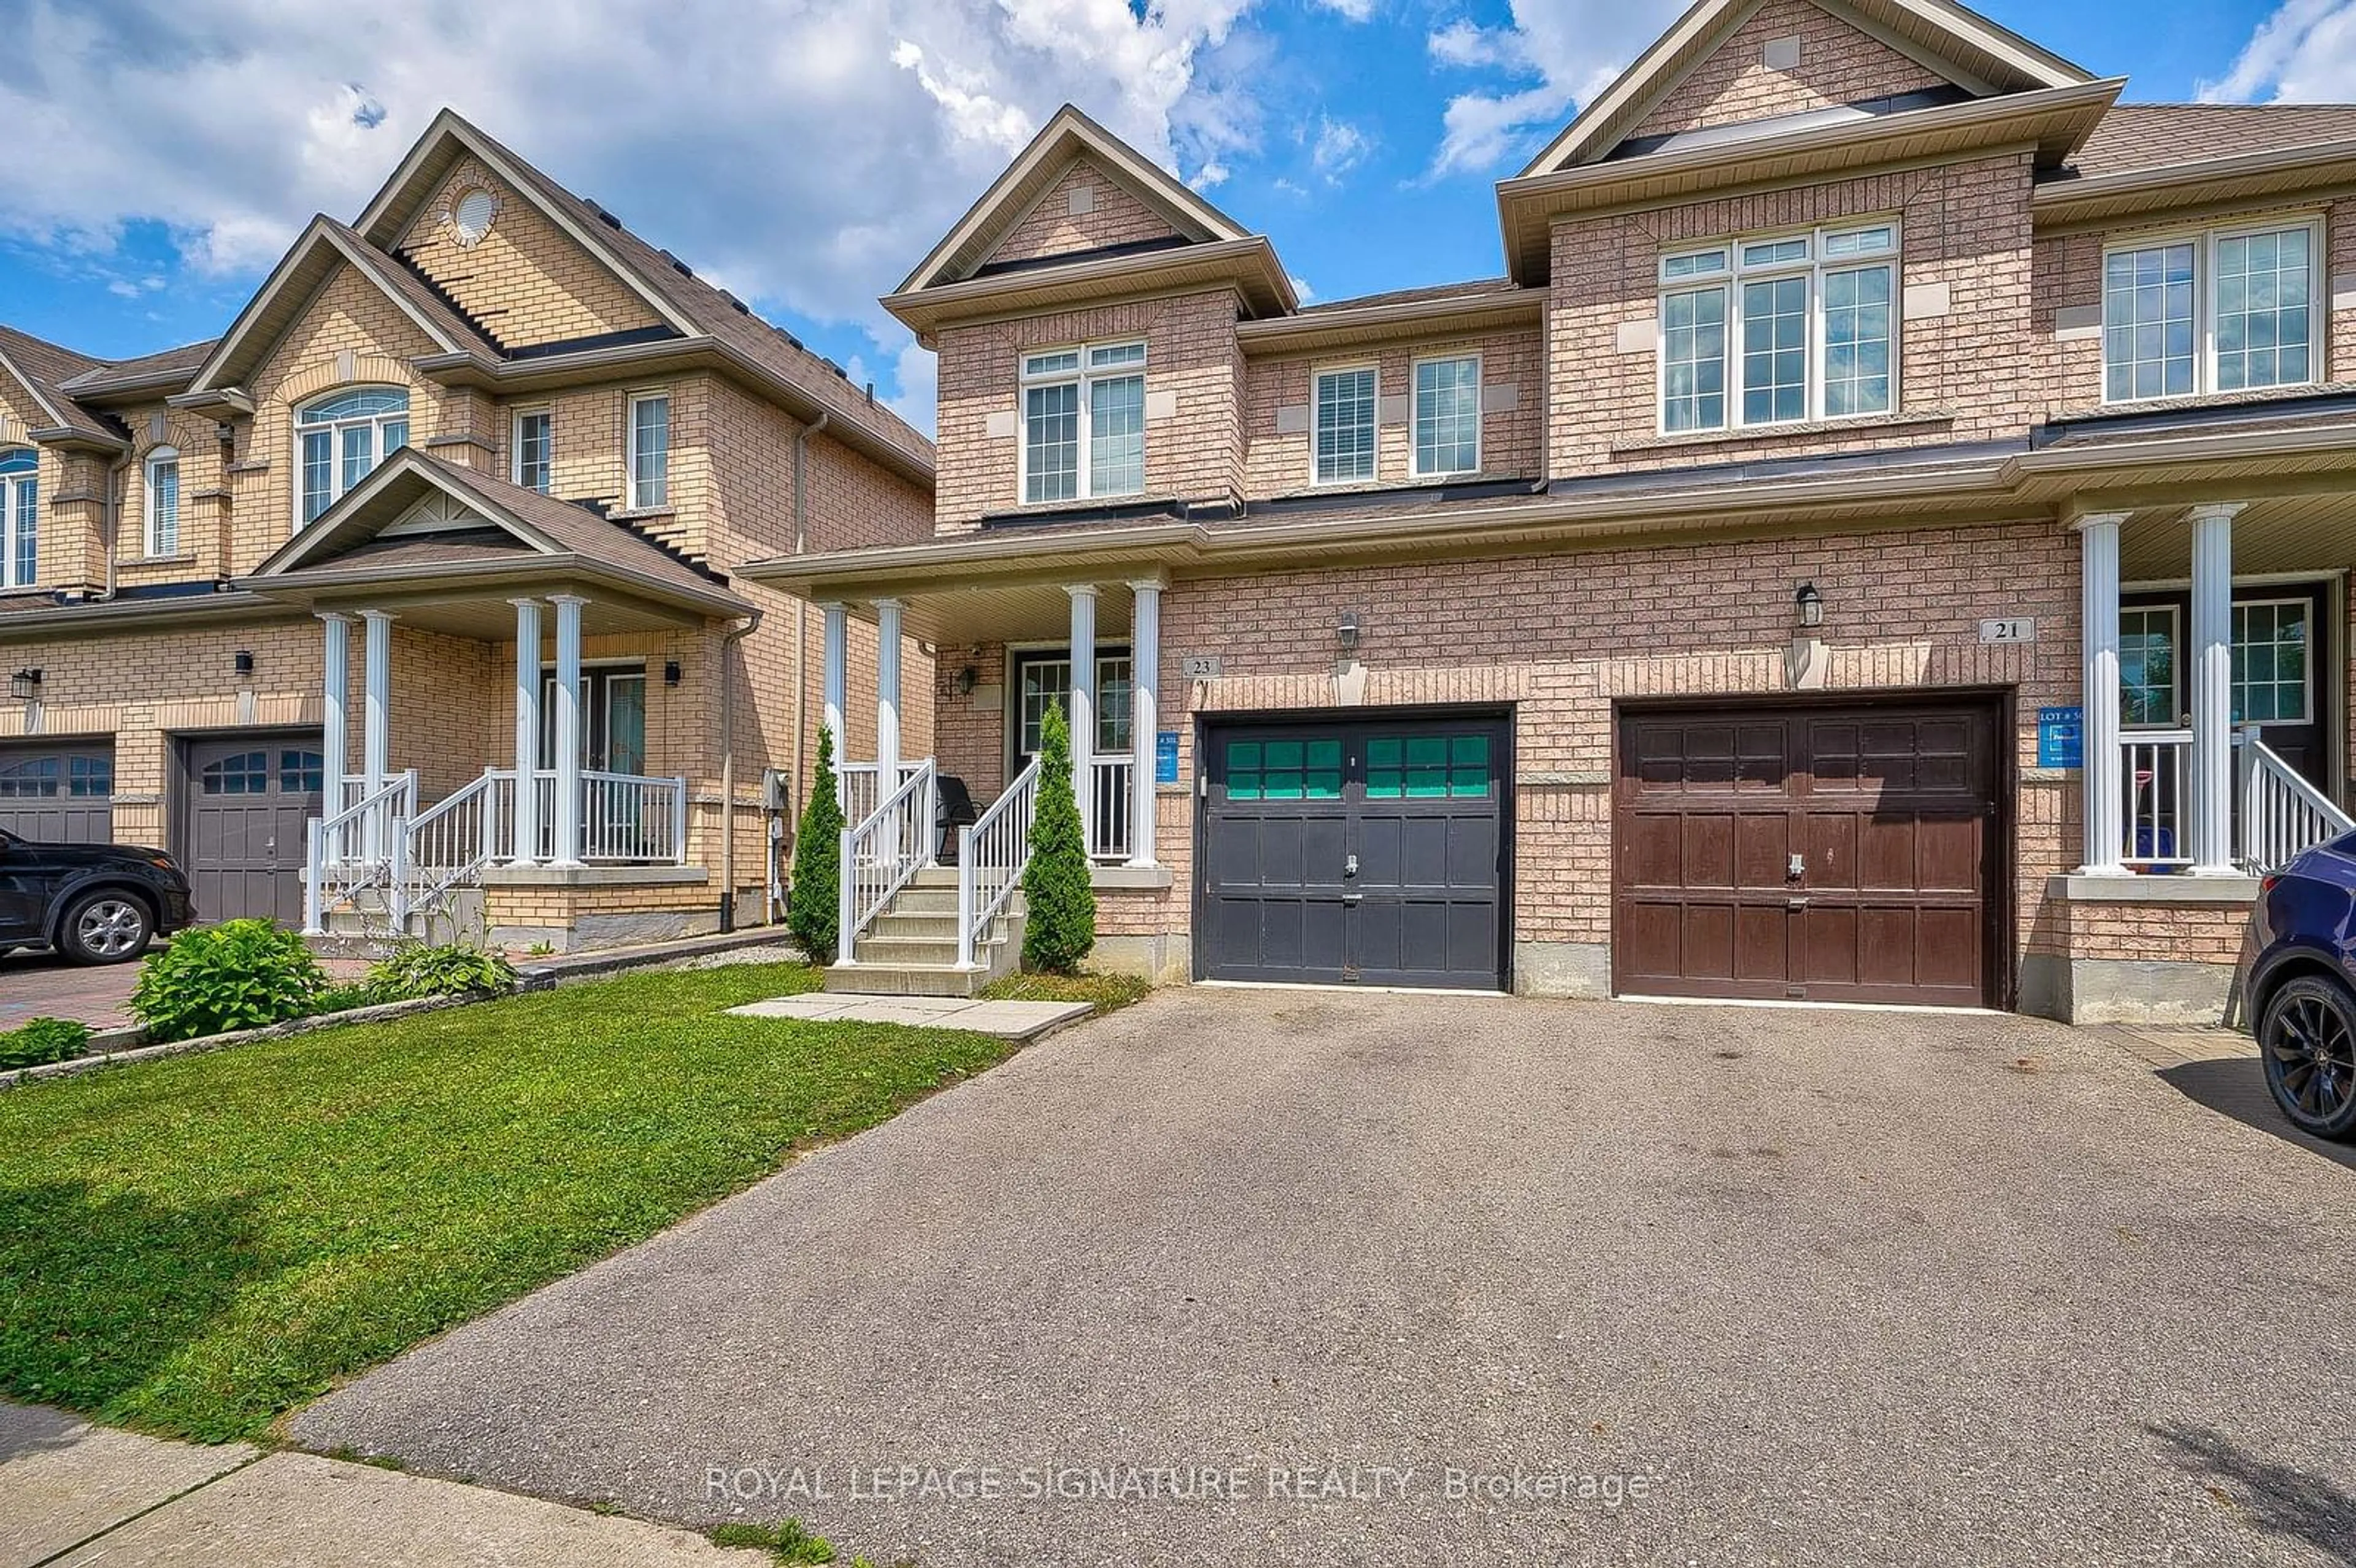 Home with brick exterior material for 23 Barli Cres, Vaughan Ontario L6A 4L4